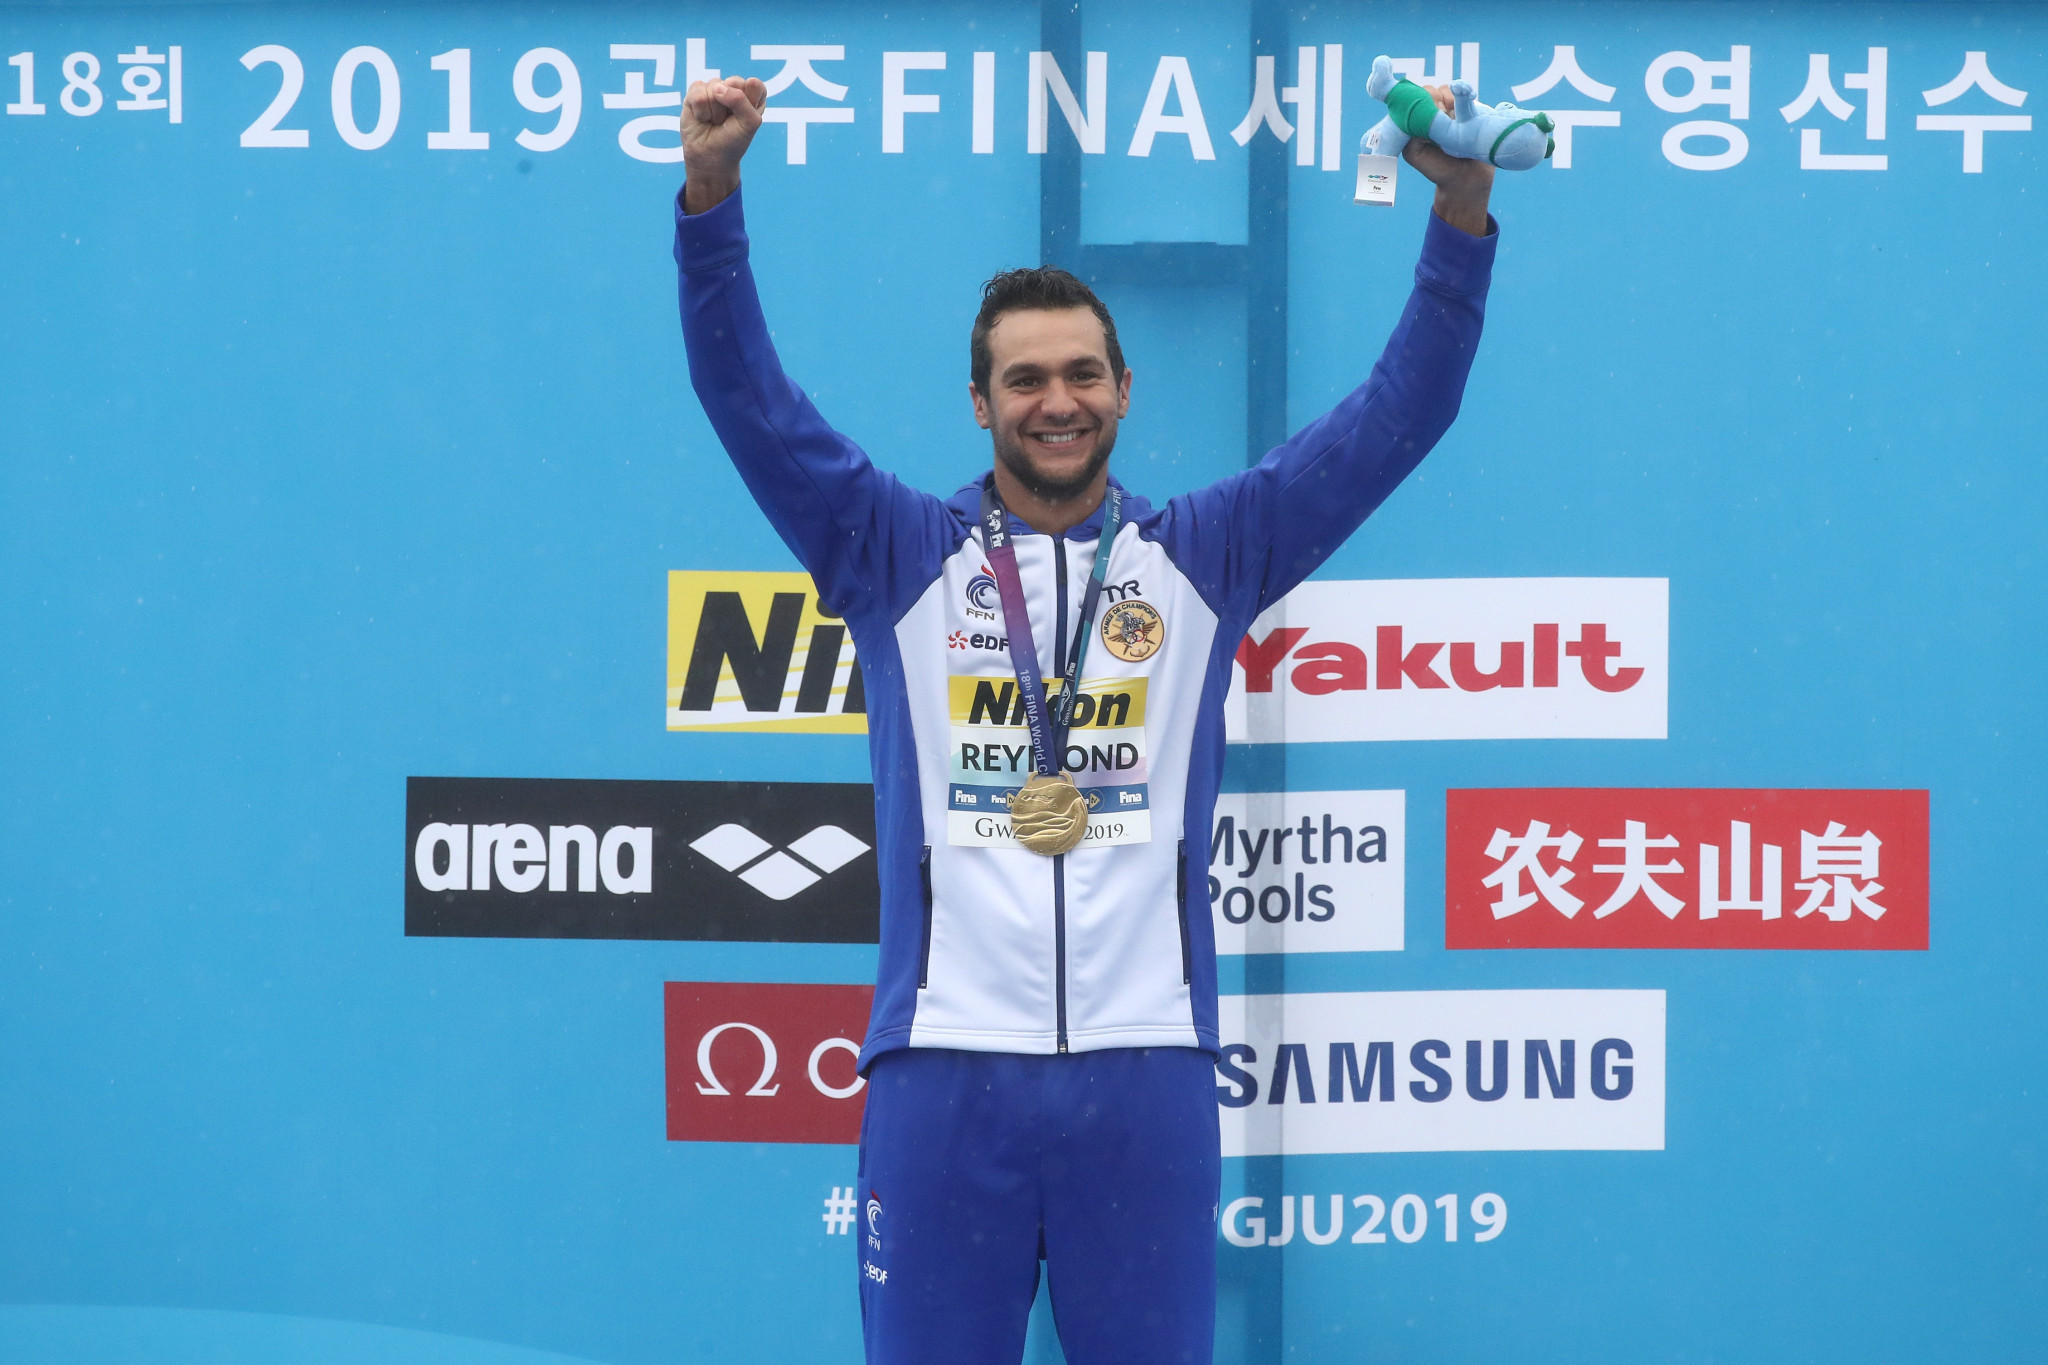 France's Axel Reymond won gold in the men's 25 kilometres open water race at the International Swimming Federation World Aquatics Championships ©Getty Images